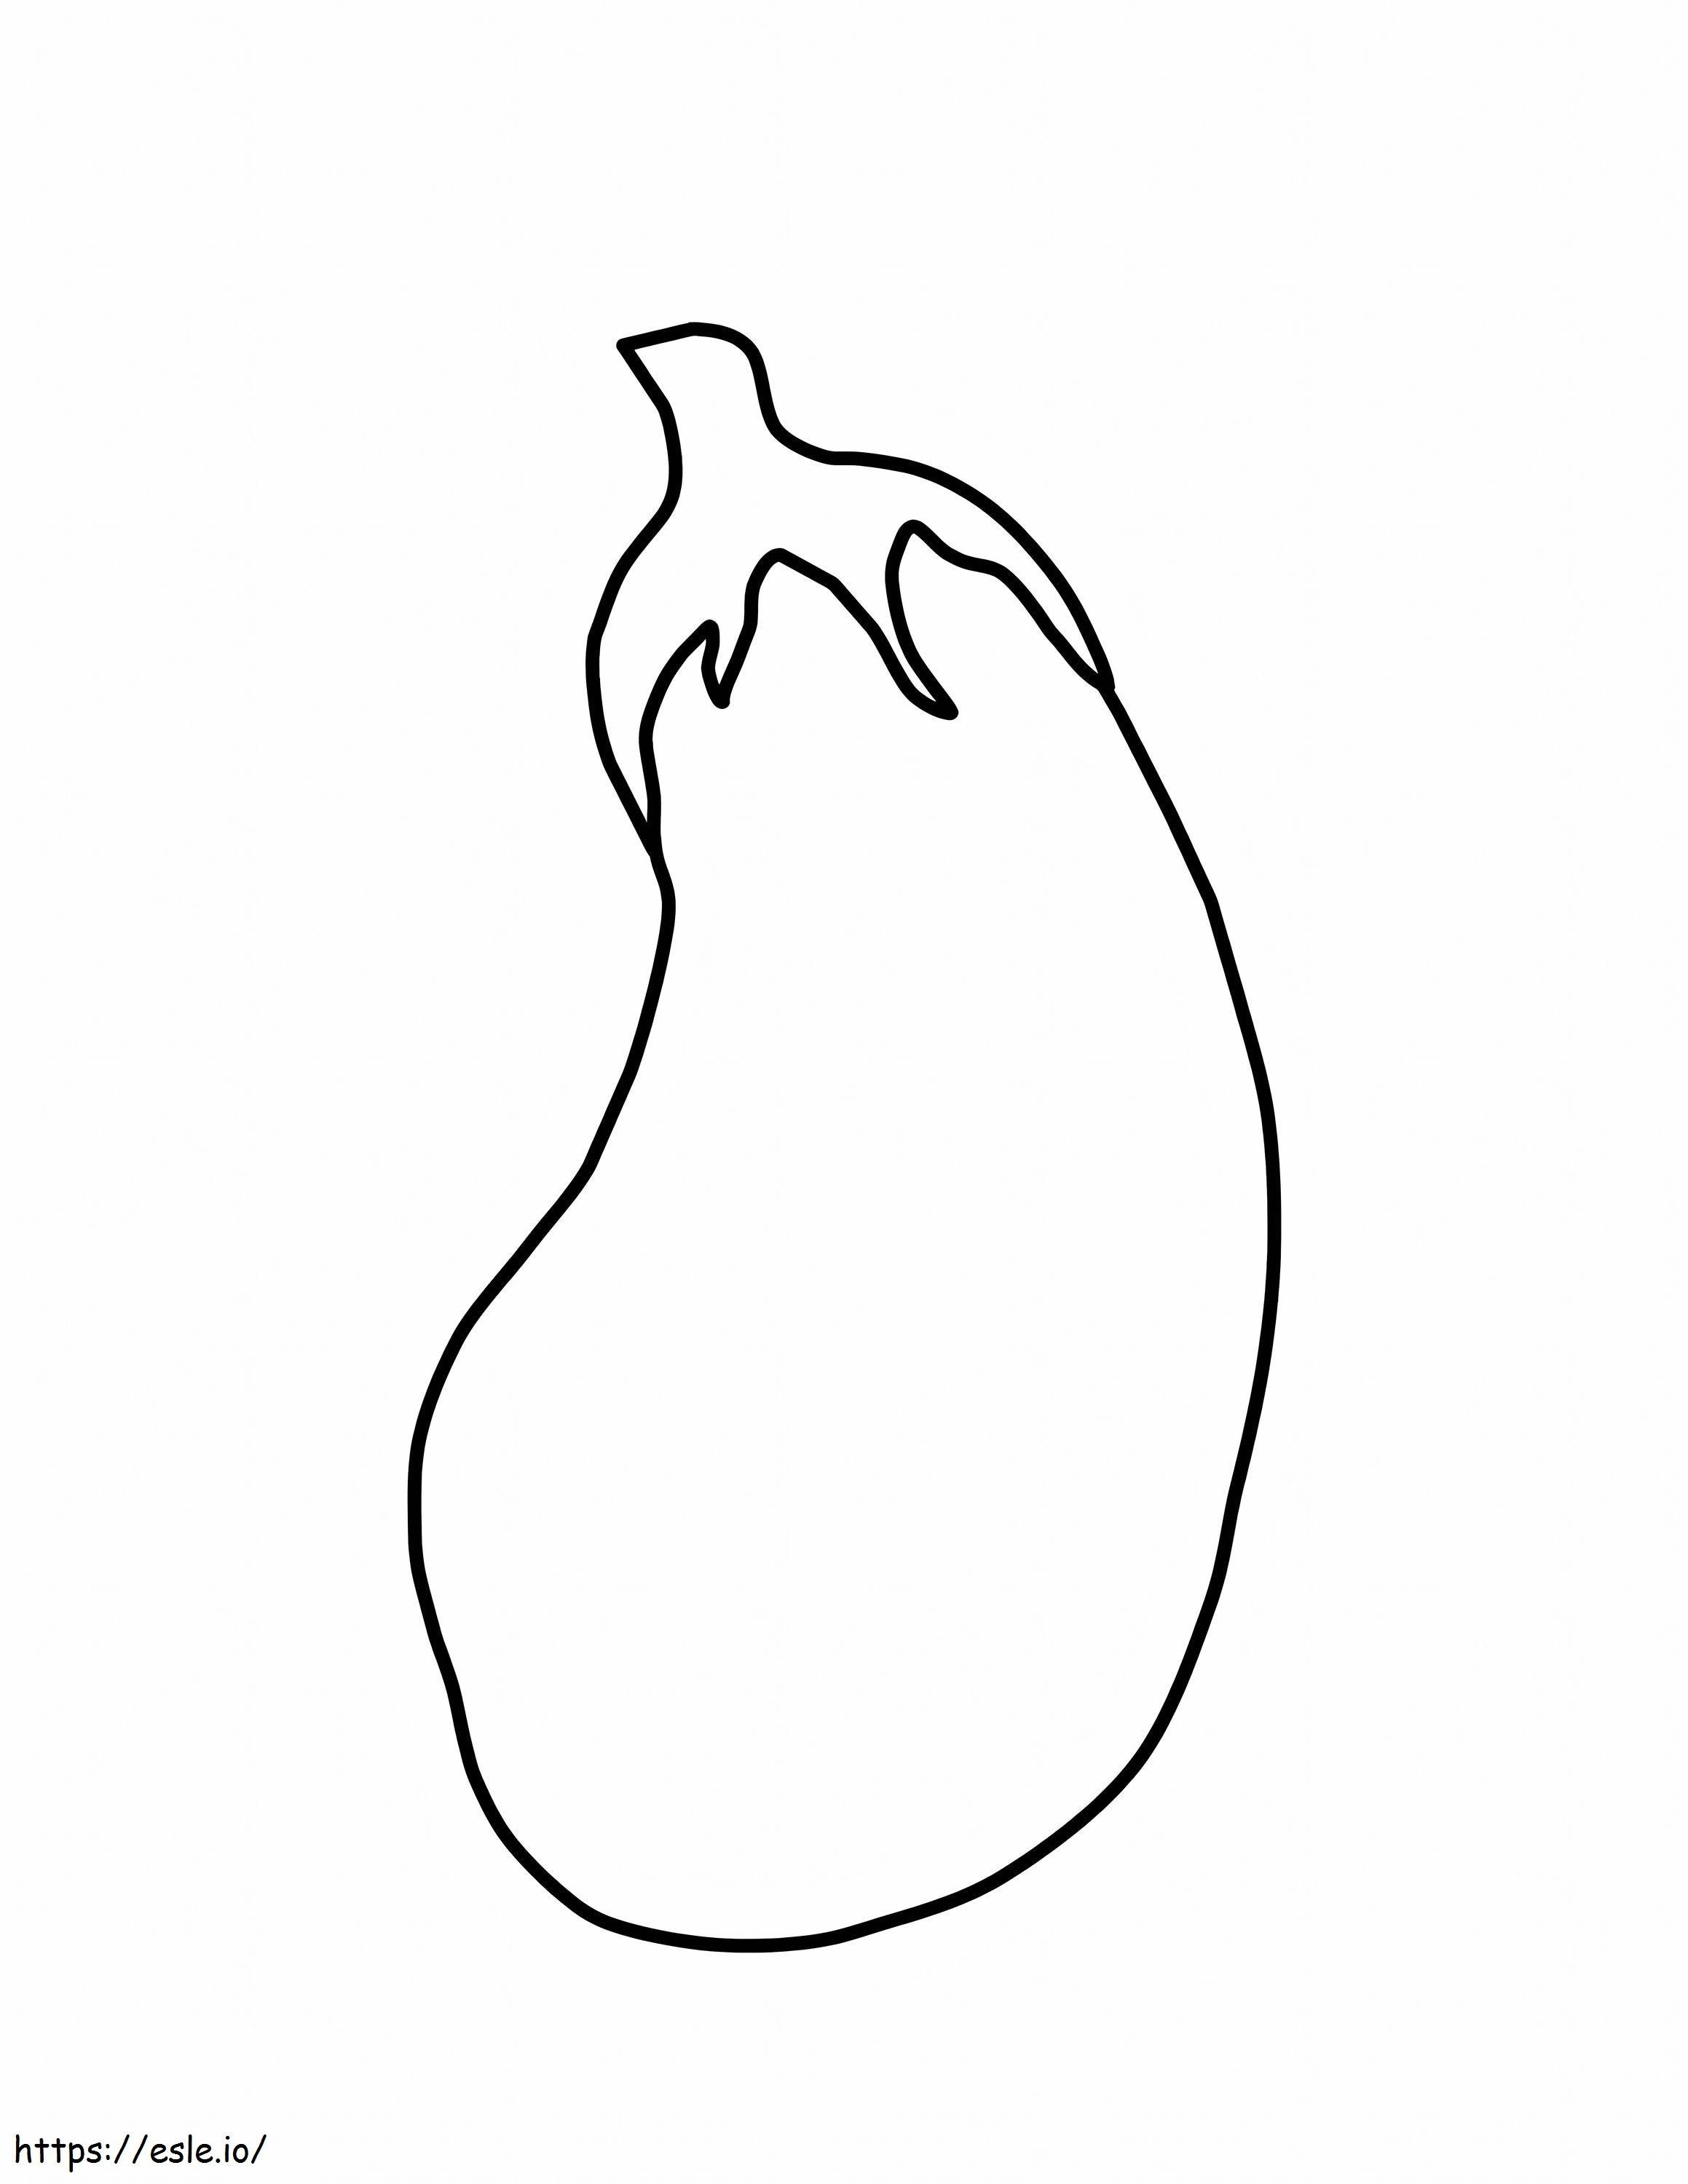 Eggplant 1 coloring page